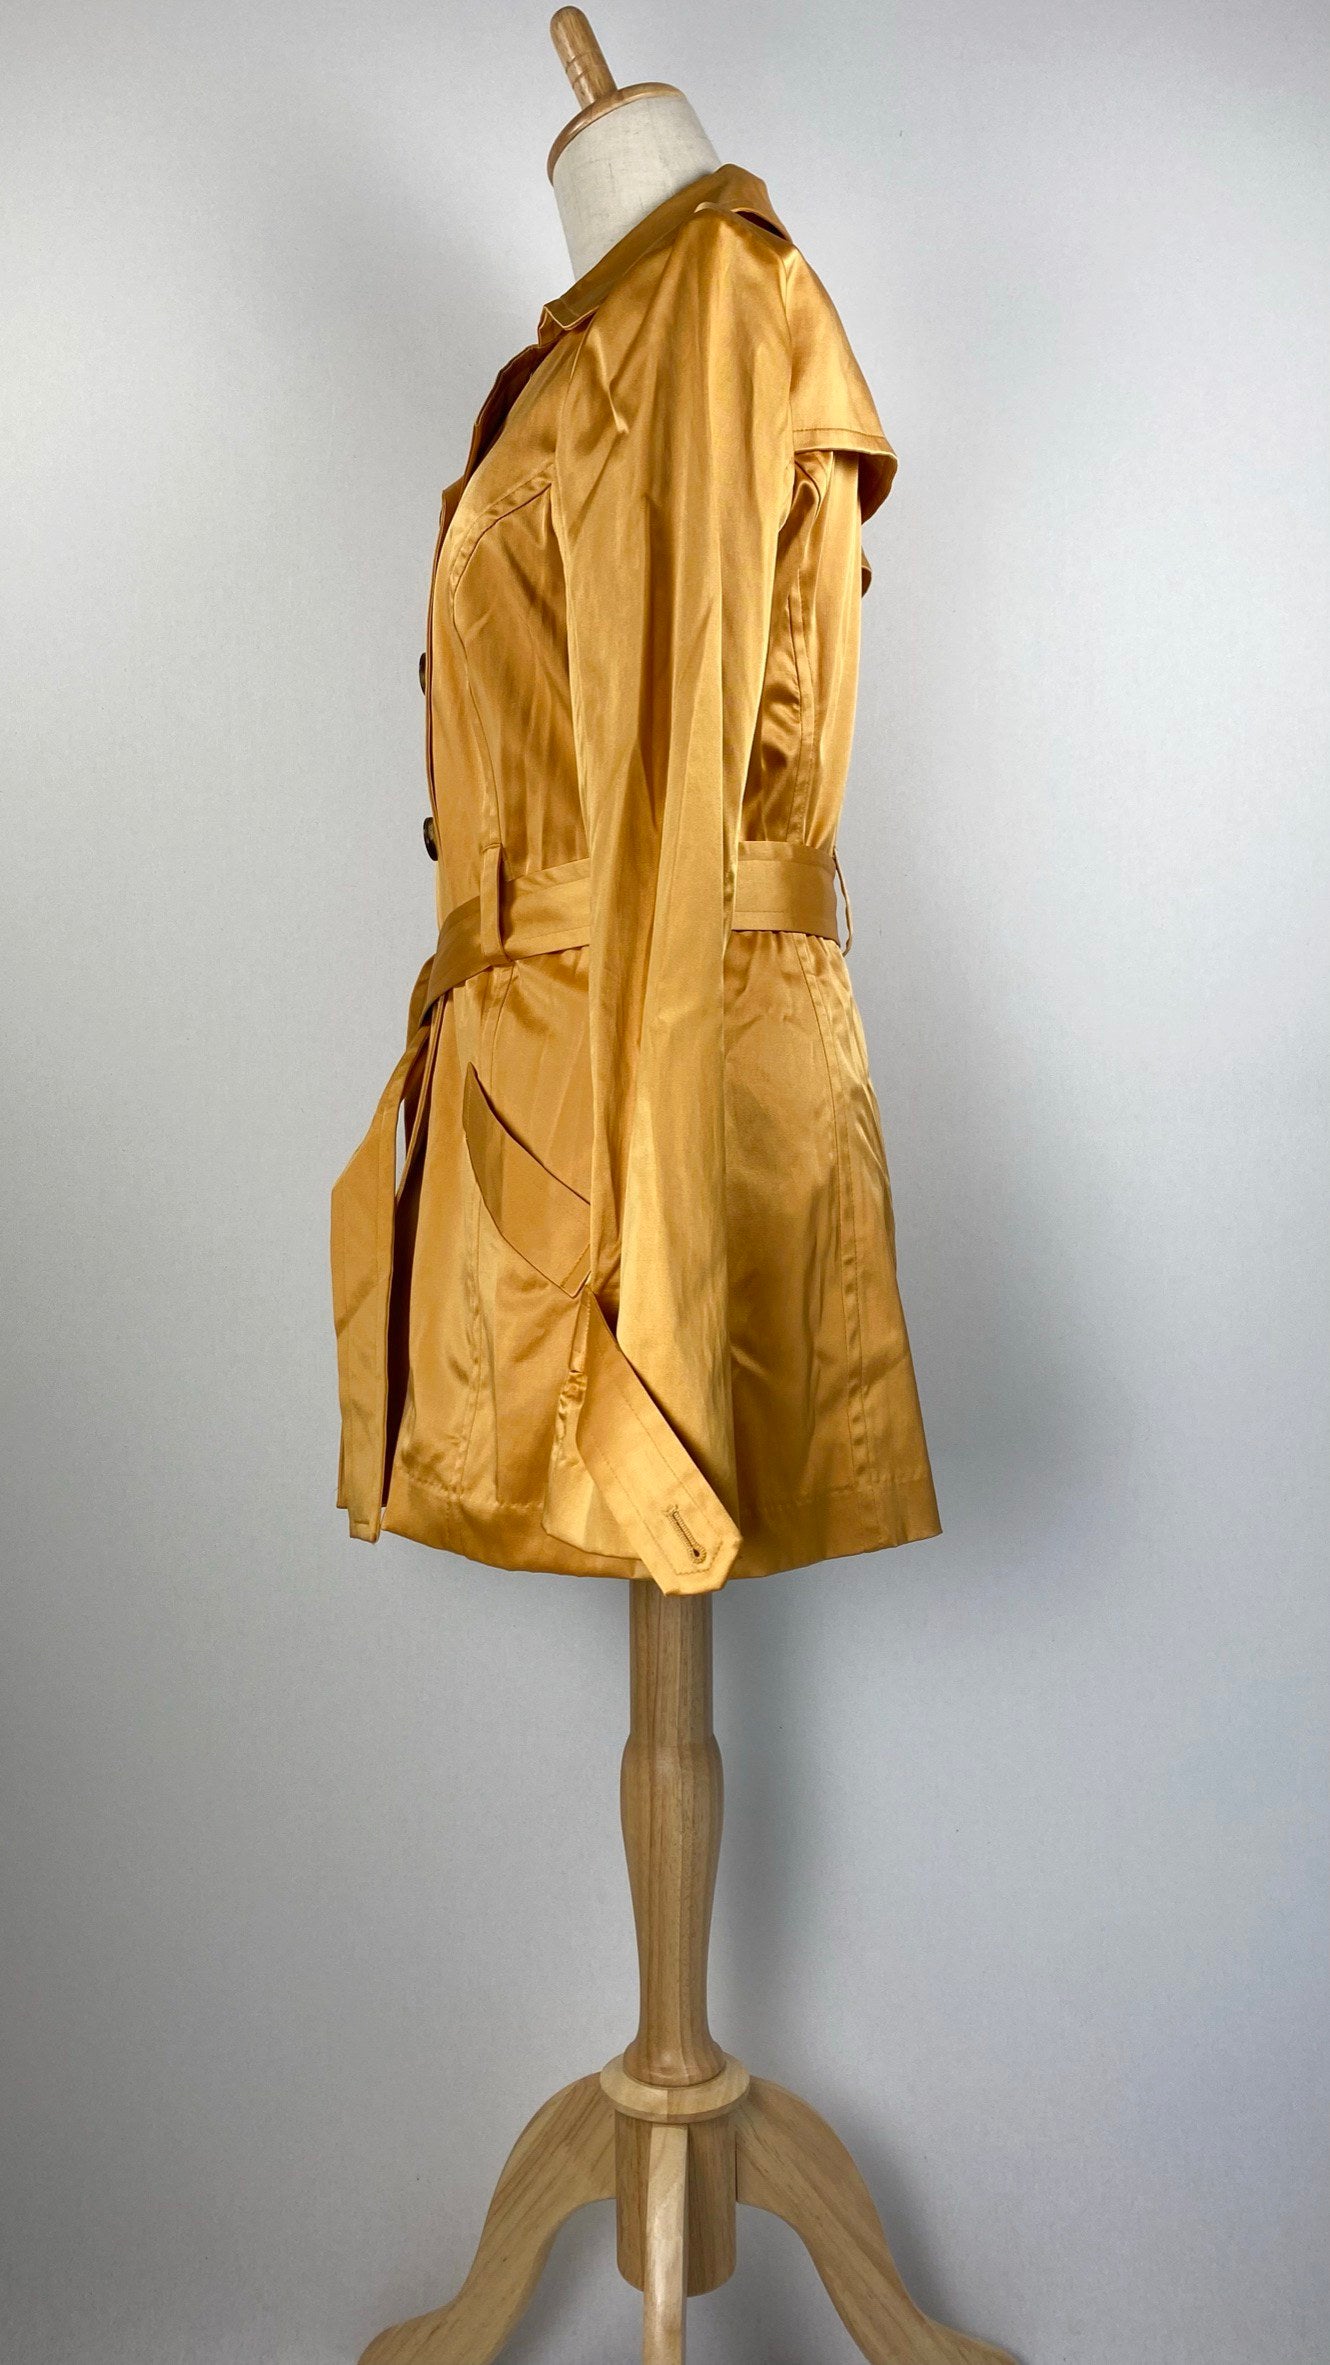 Long Sleeve Double Breasted Trench Coat, Mustard